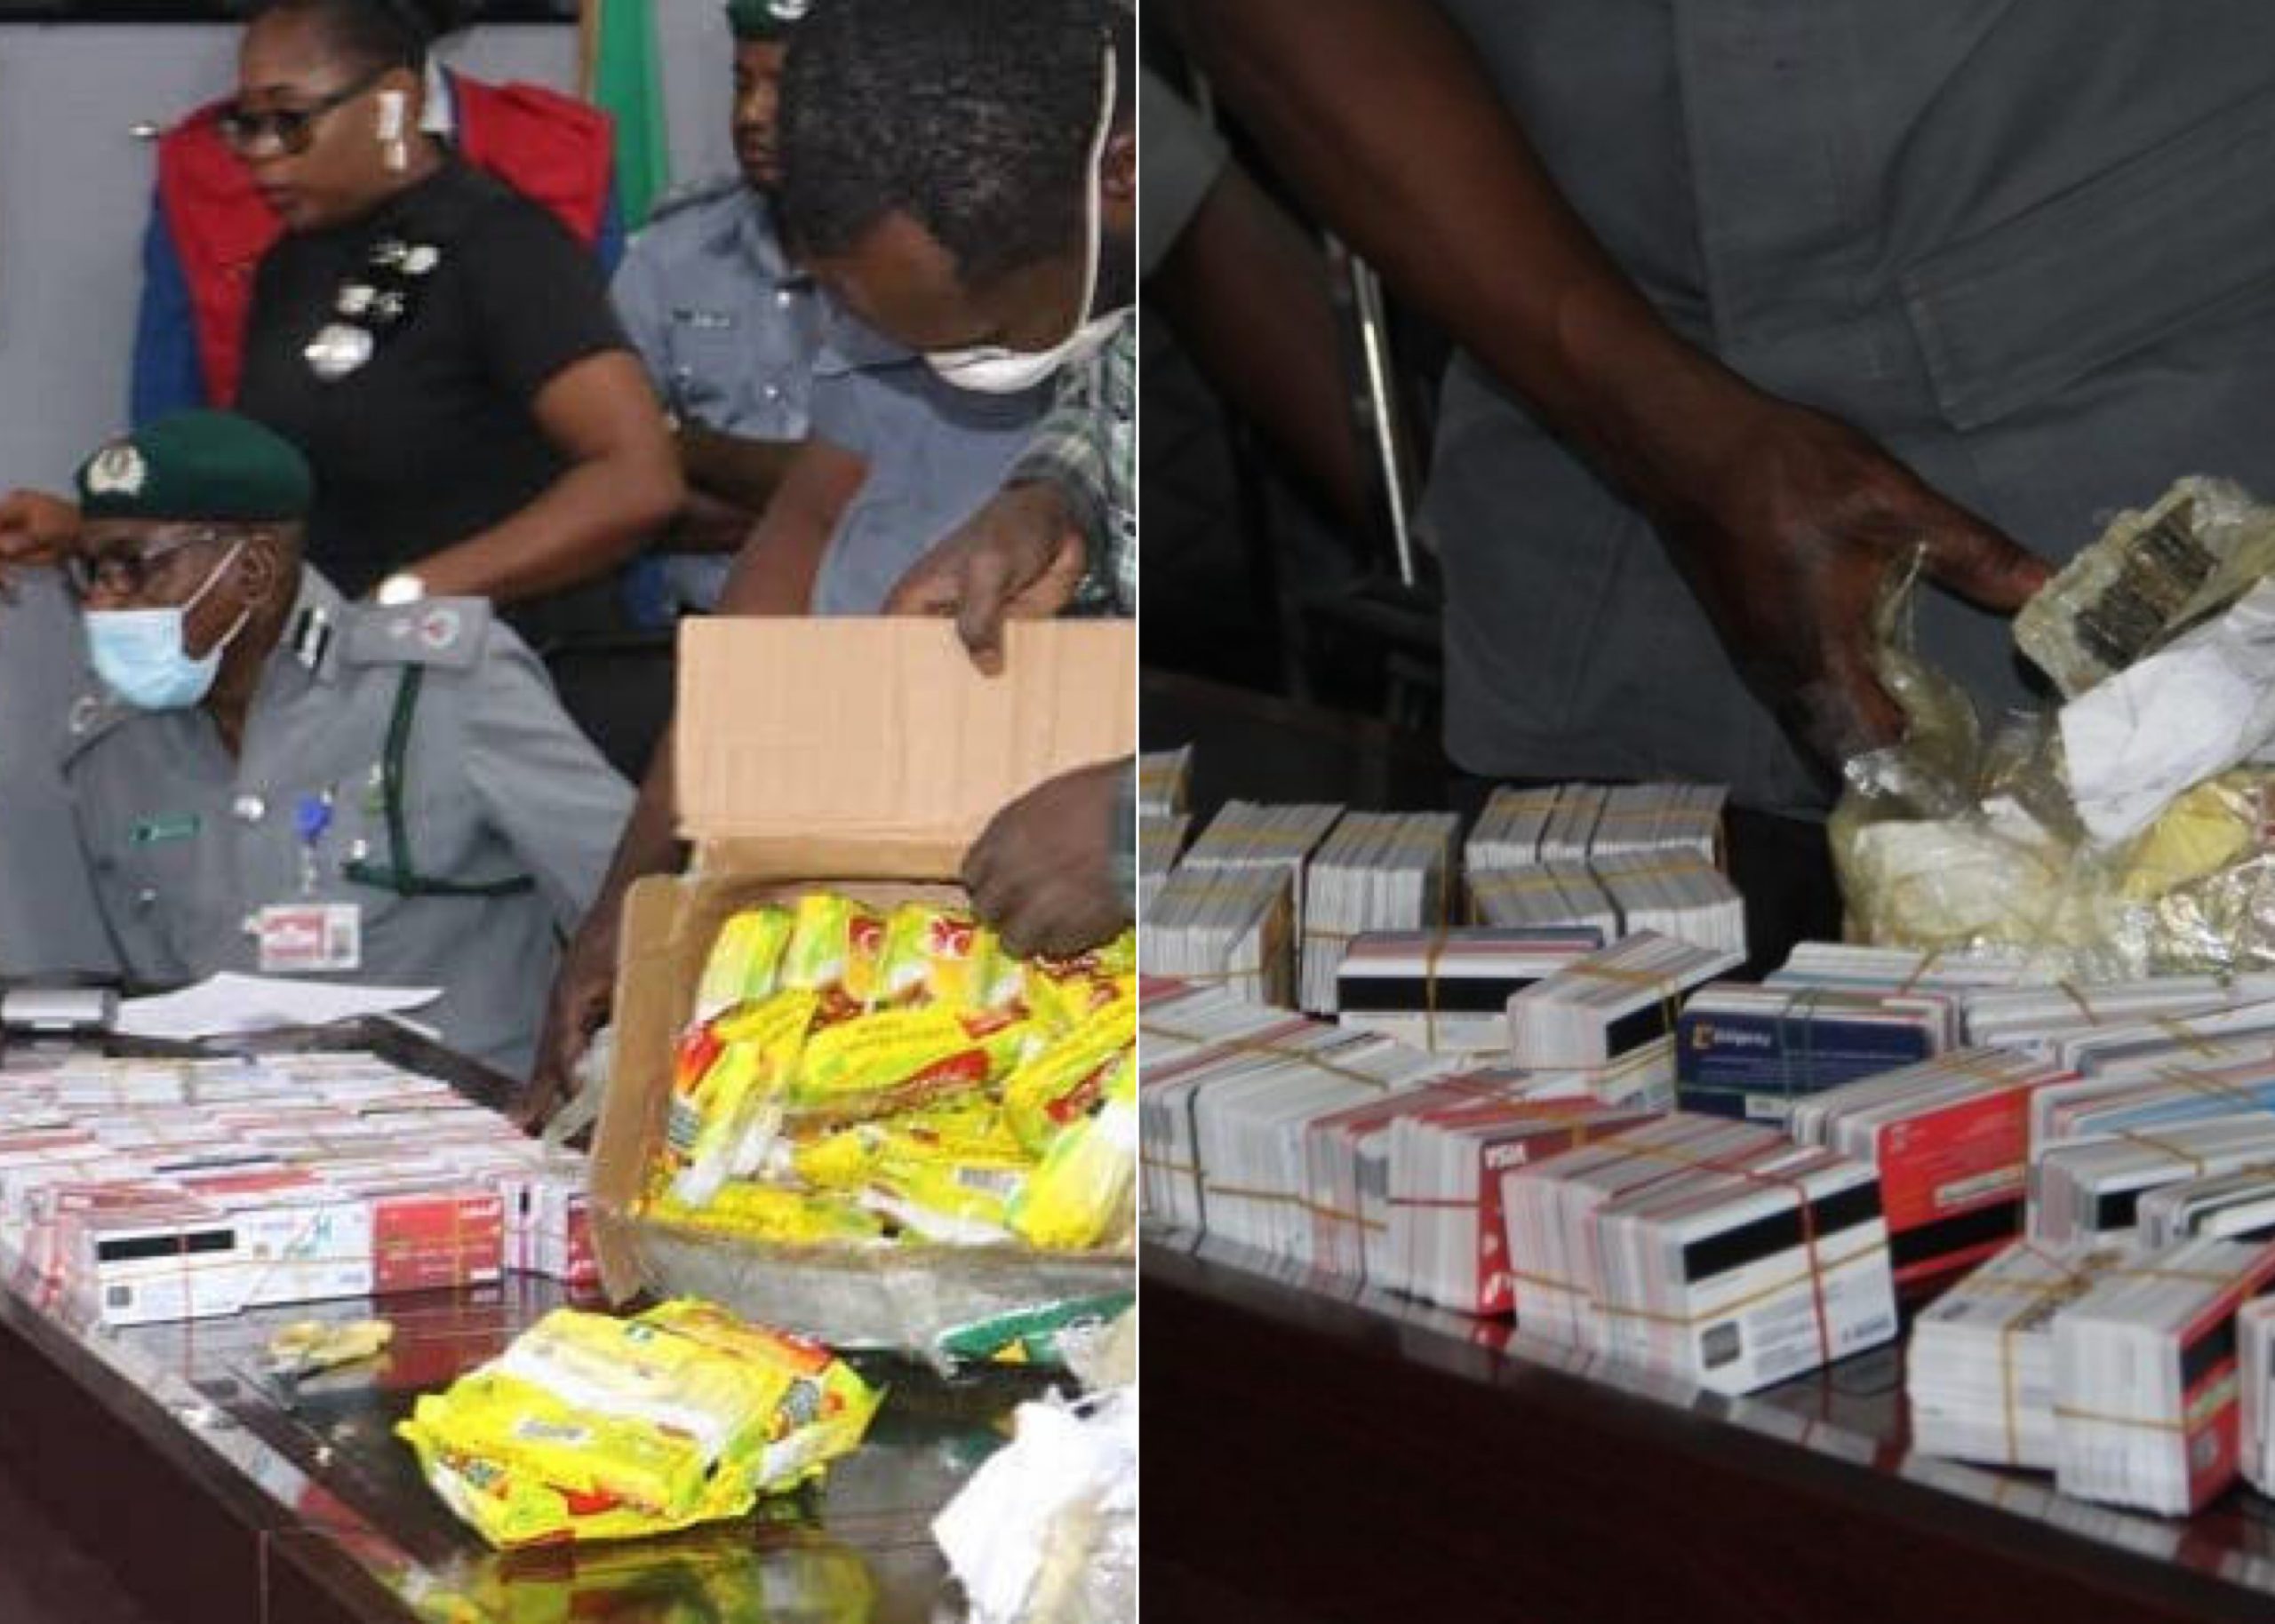 Dubai-Bound Passenger Arrested At Lagos Airport With 2,886 ATM Cards Hidden In Noodles